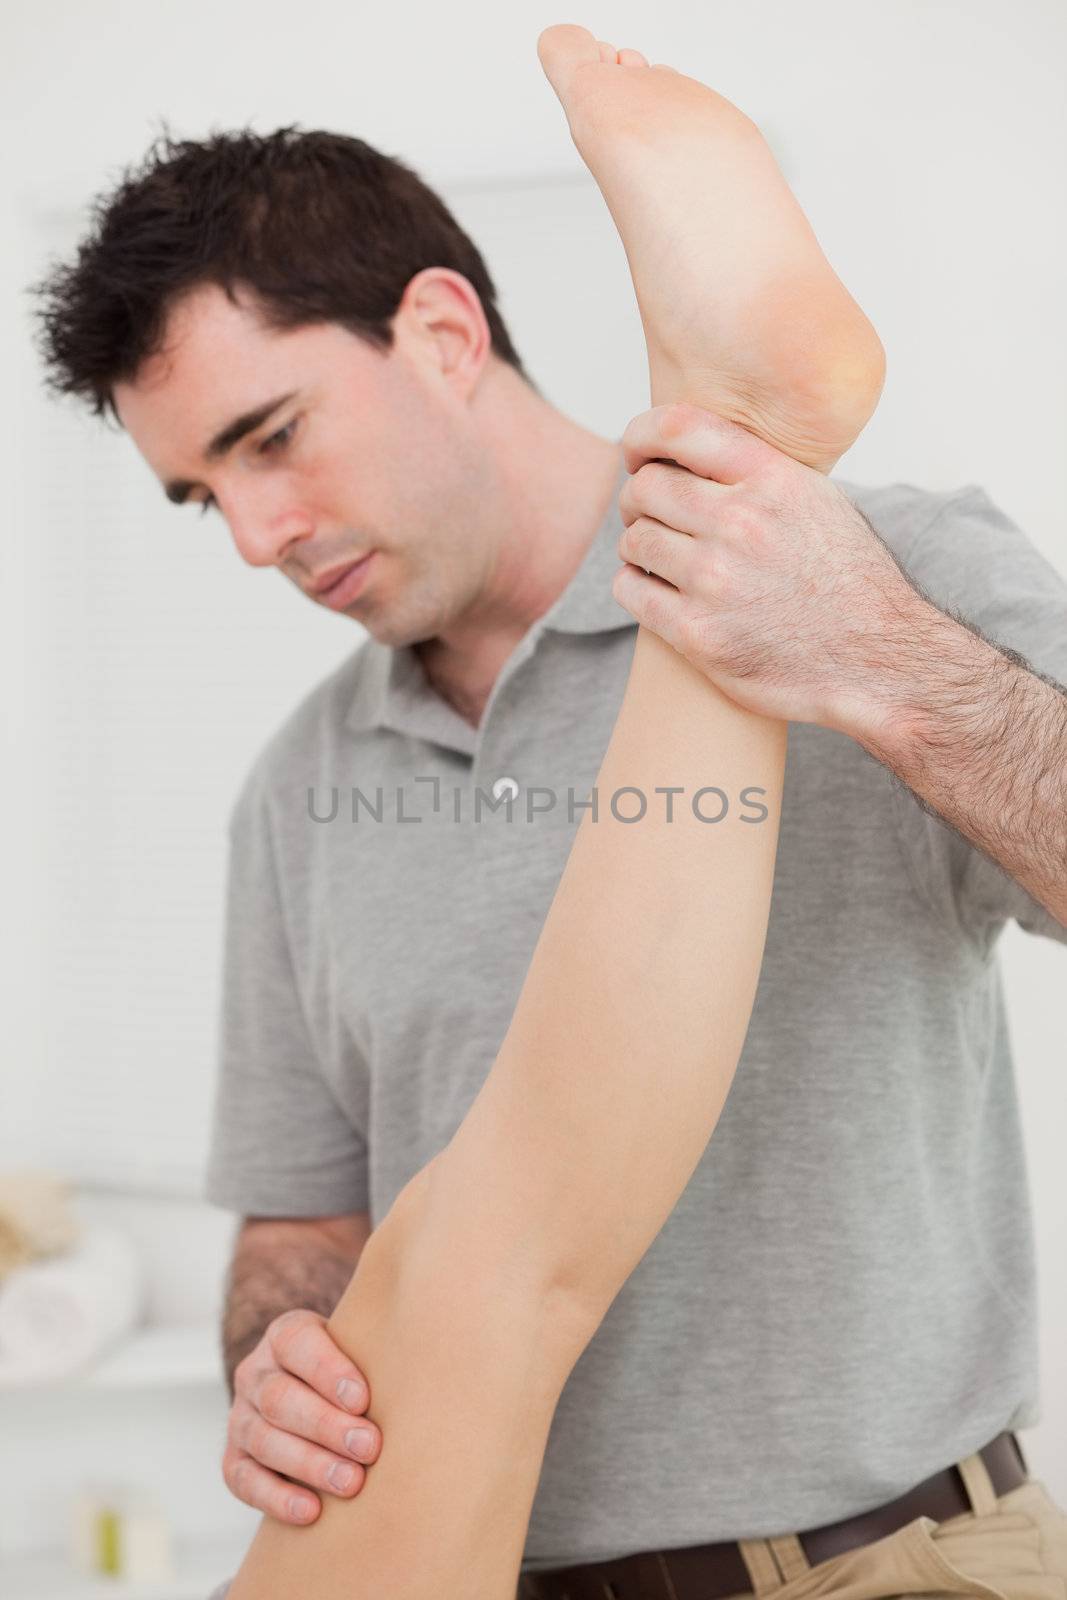 Chiropractor extending the leg of a patient in a room